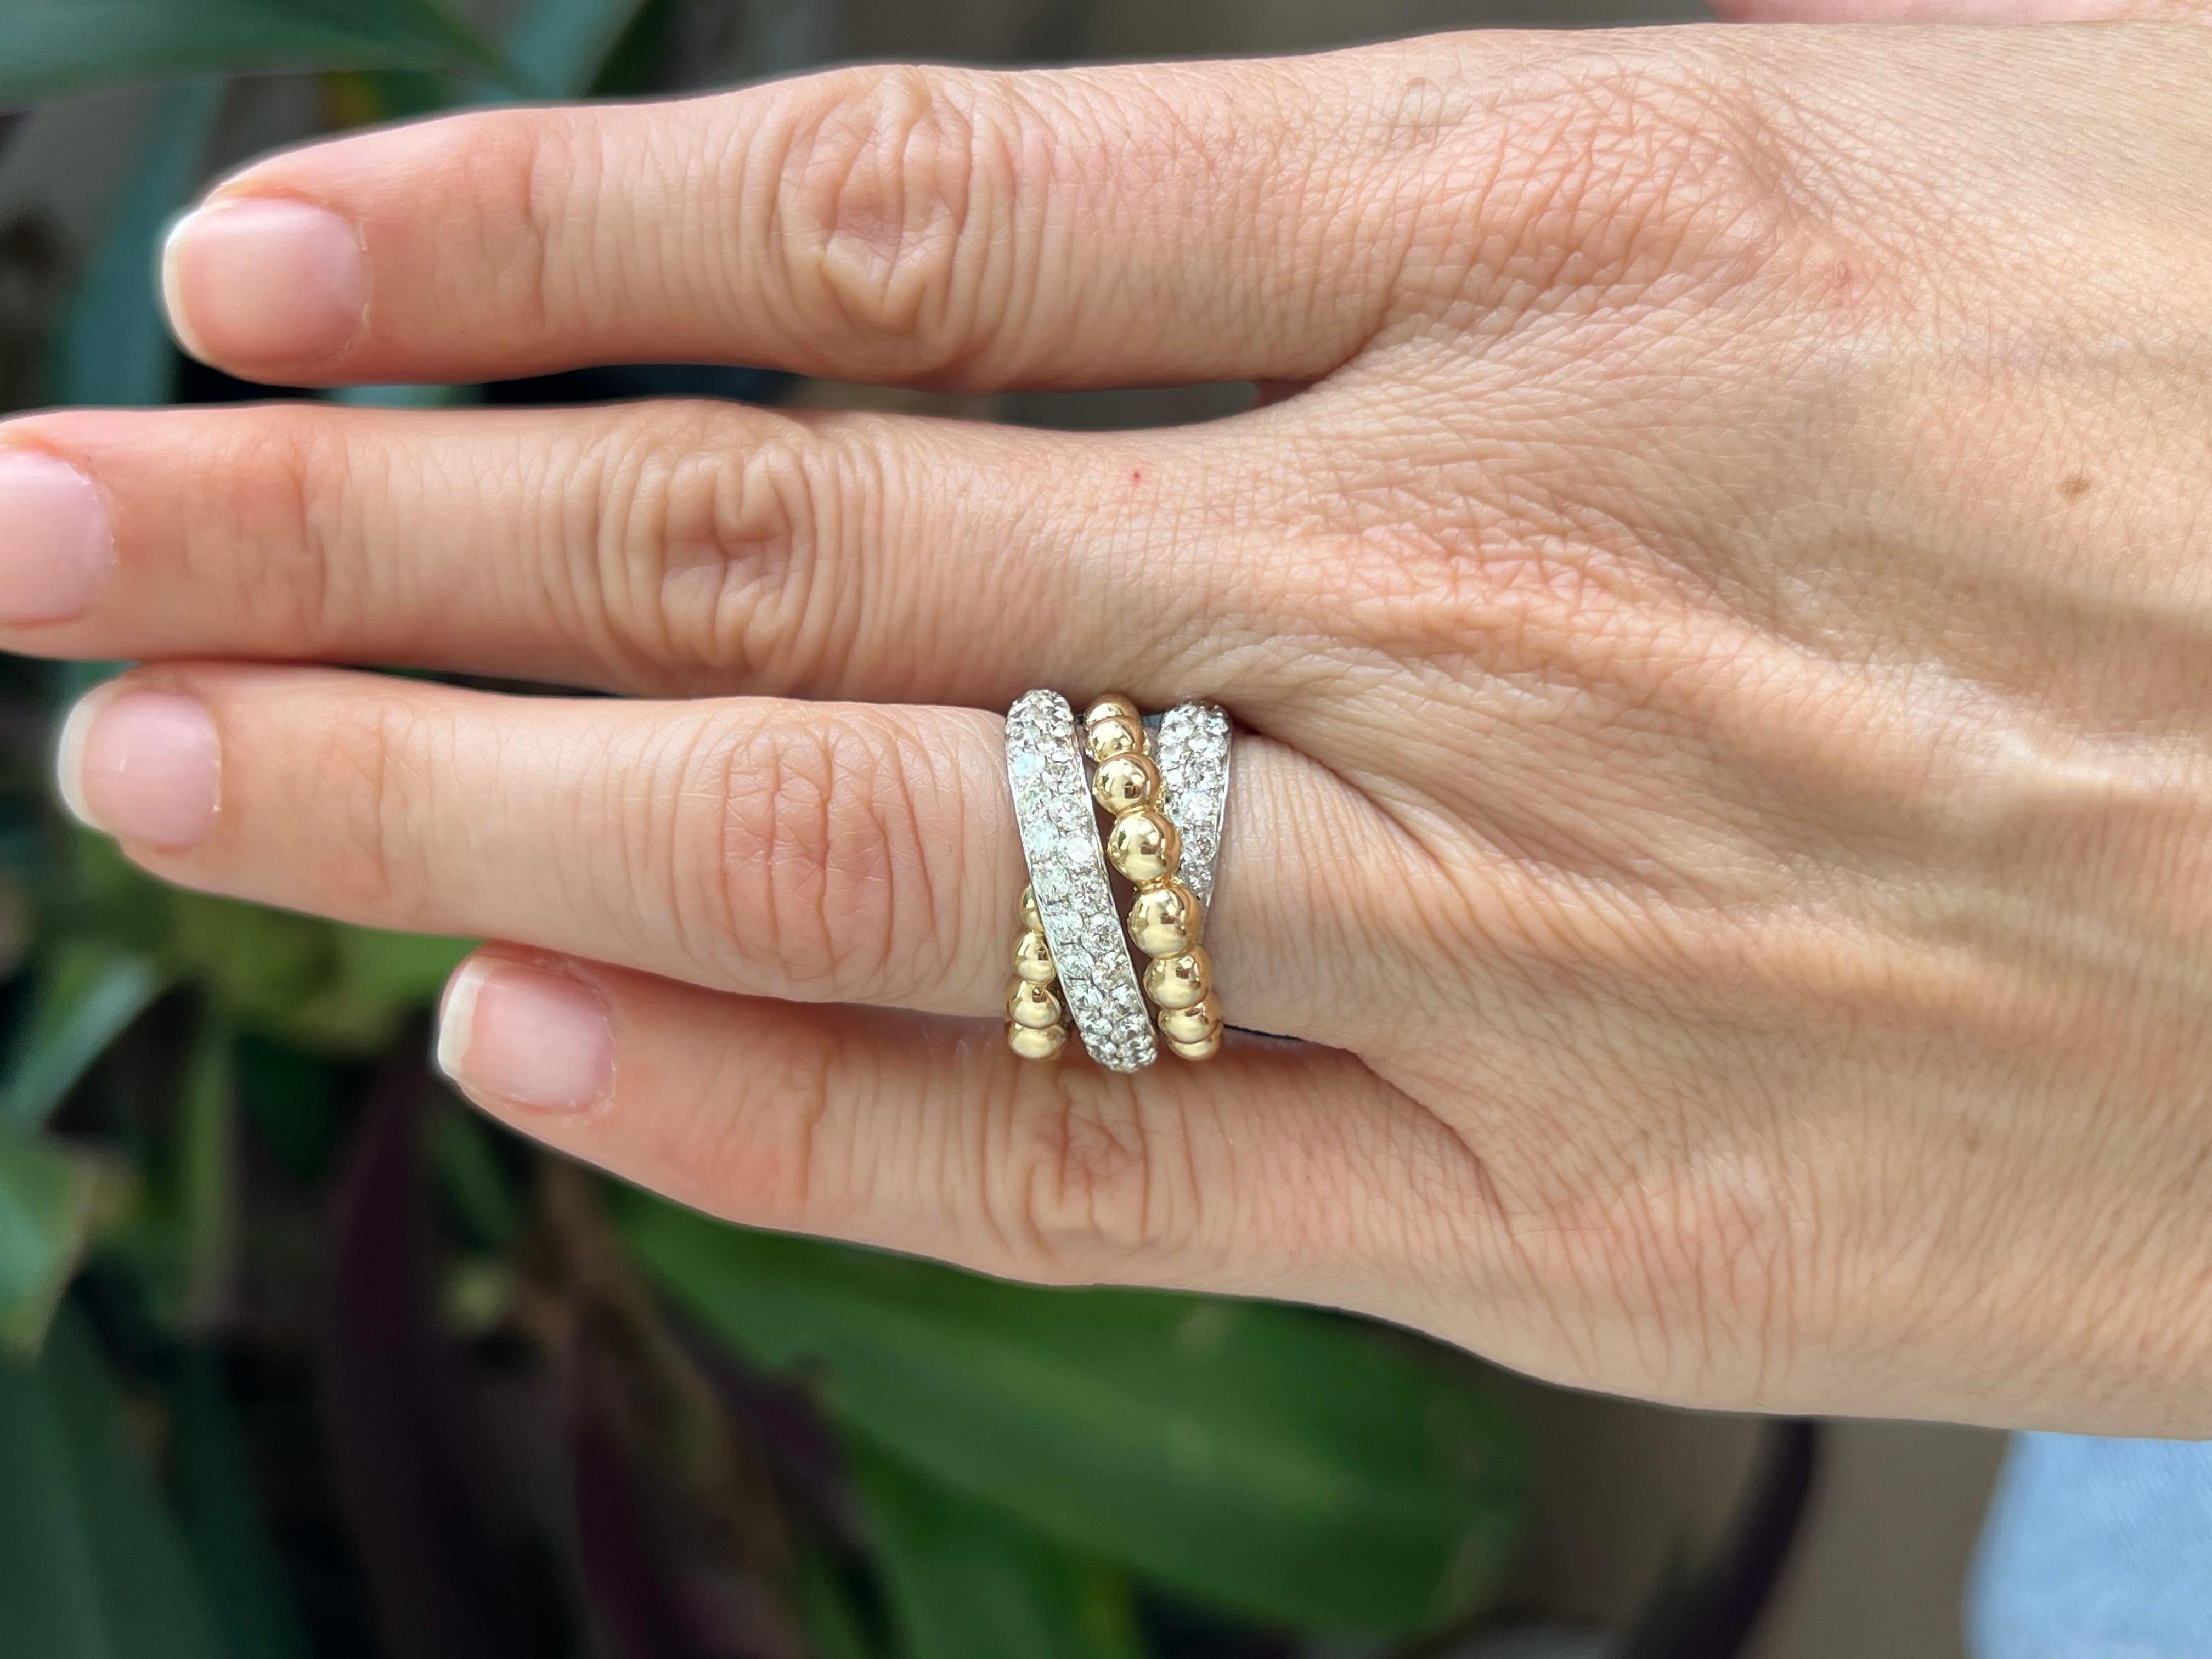 14K white and yellow gold ring with diamond in a multi wrap ring style.

This two tone gold and diamond ring features a classic, timeless design that is versatile enough to be worn for any occasion. Crafted from luxurious 14k gold and premium